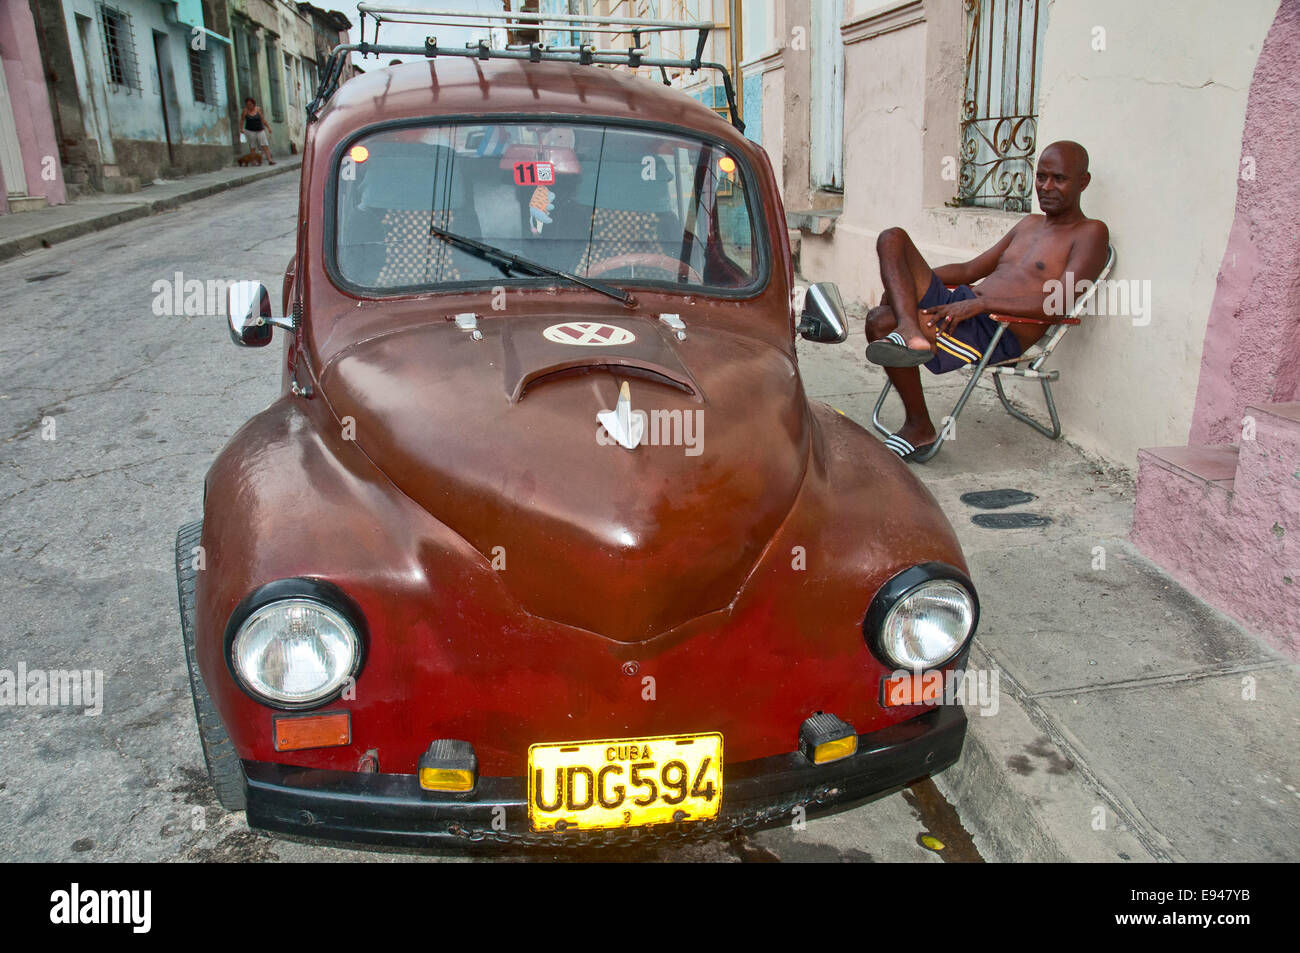 Old french car in cuba Stock Photo